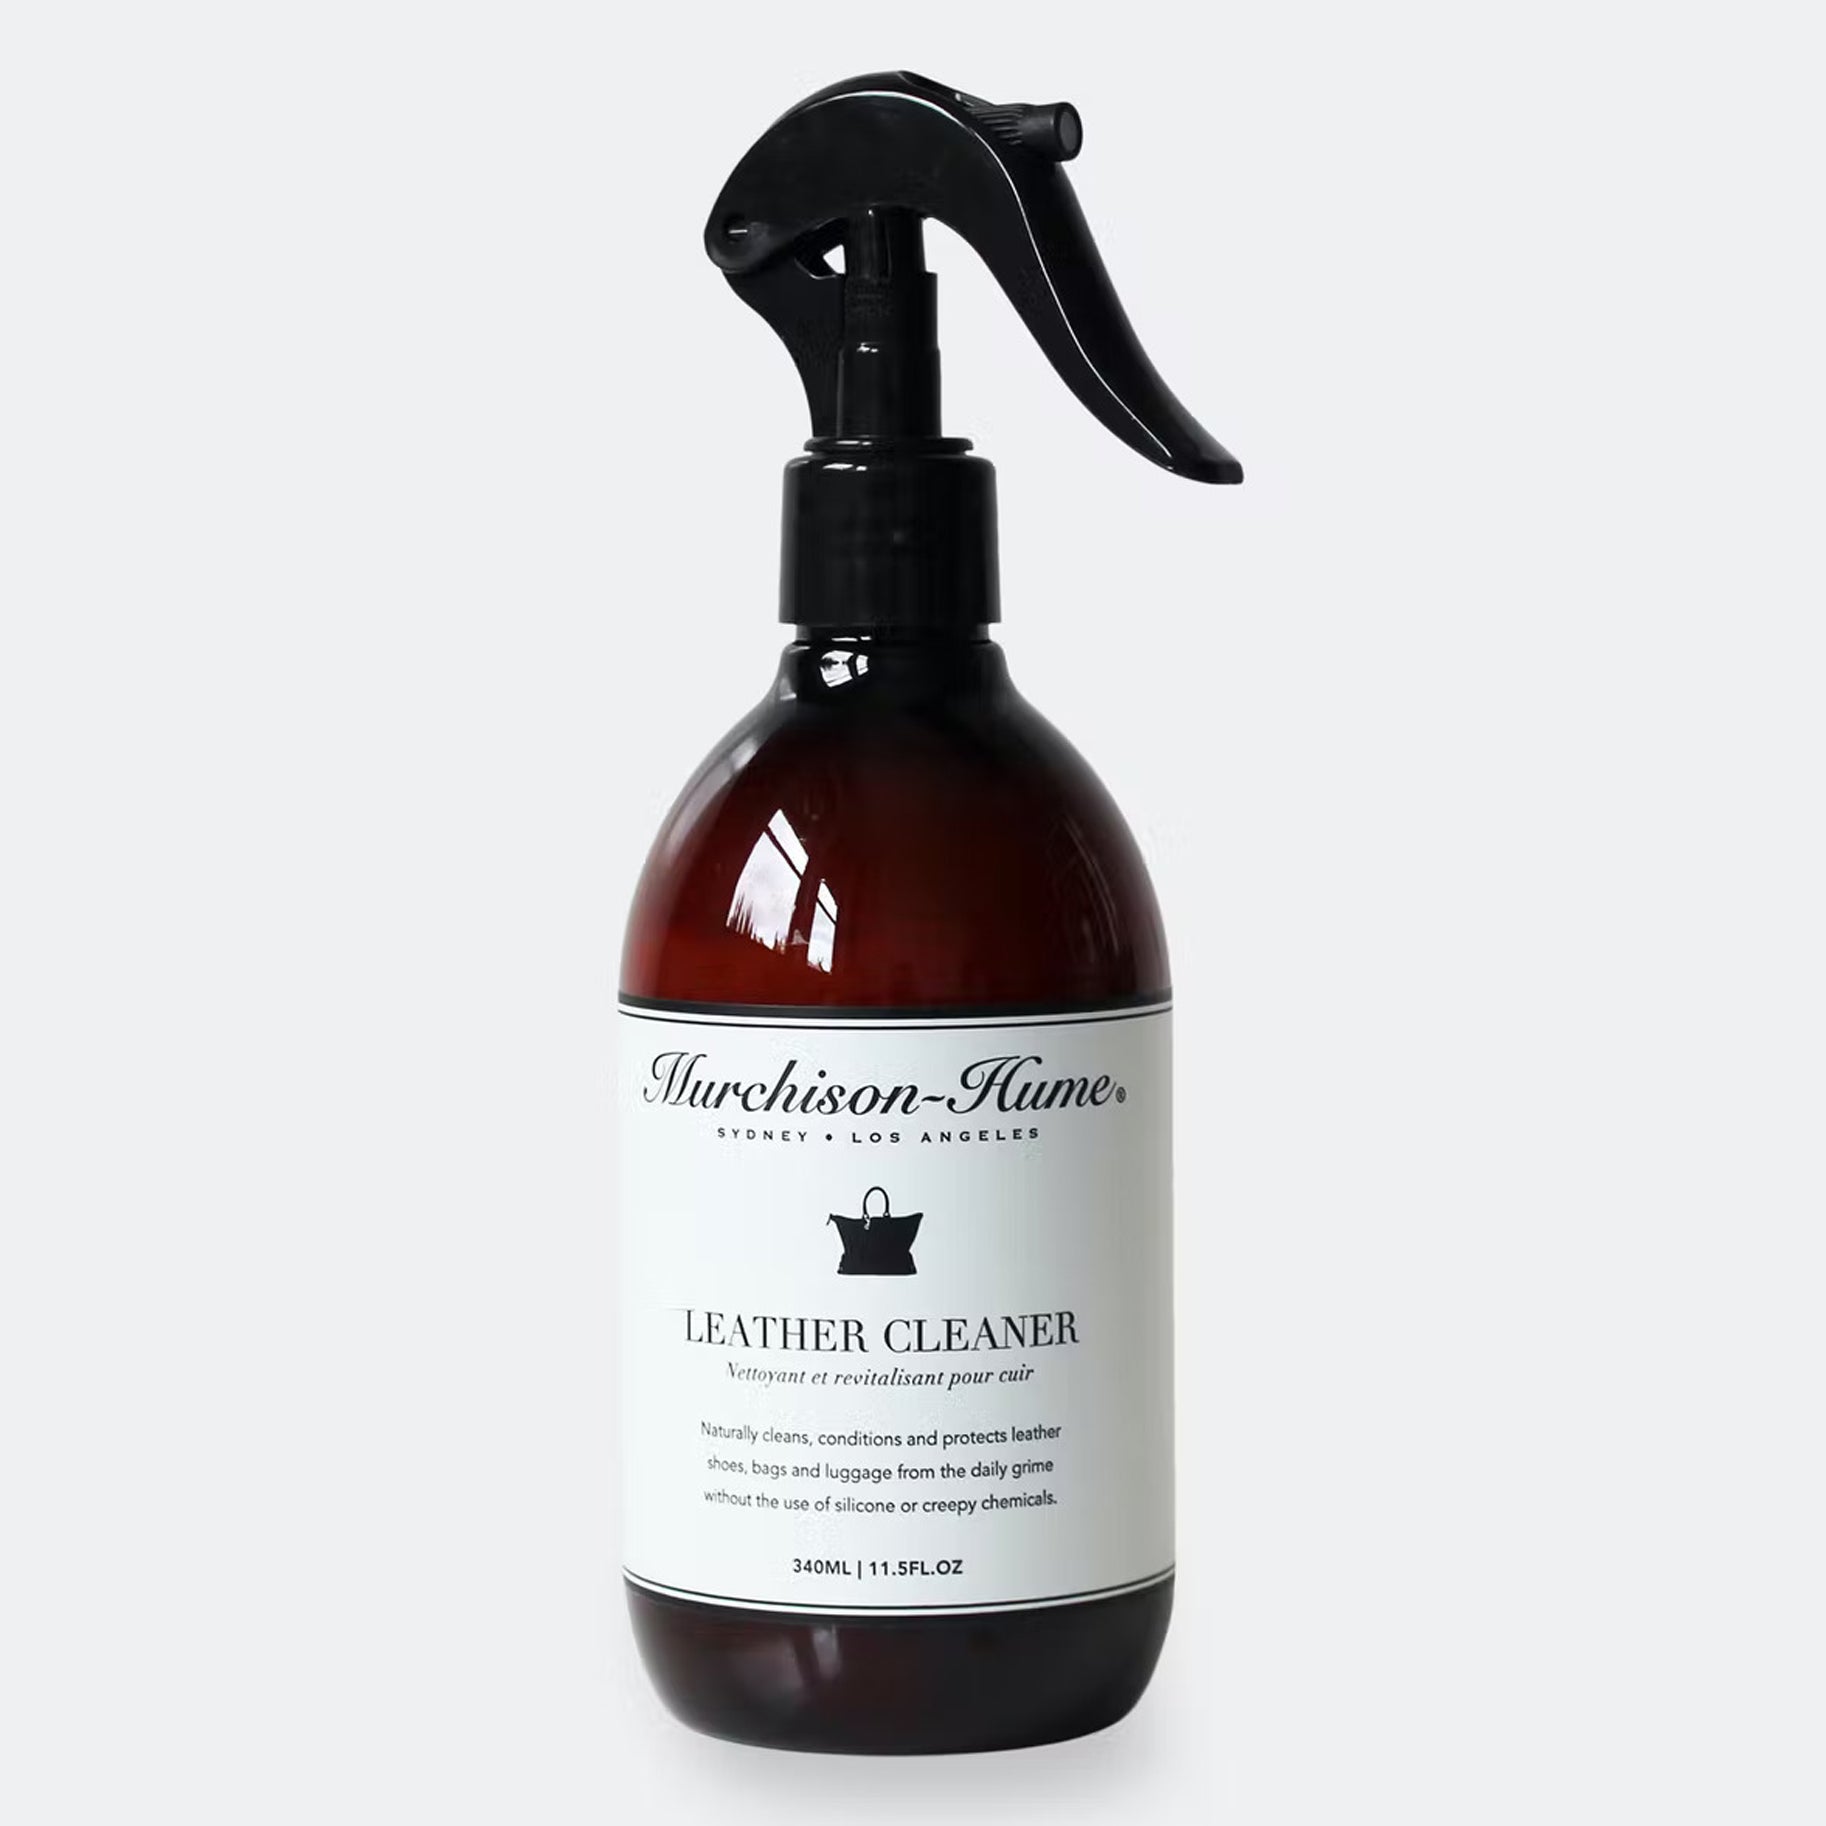 Murchison Hume Leather Cleaner Domino